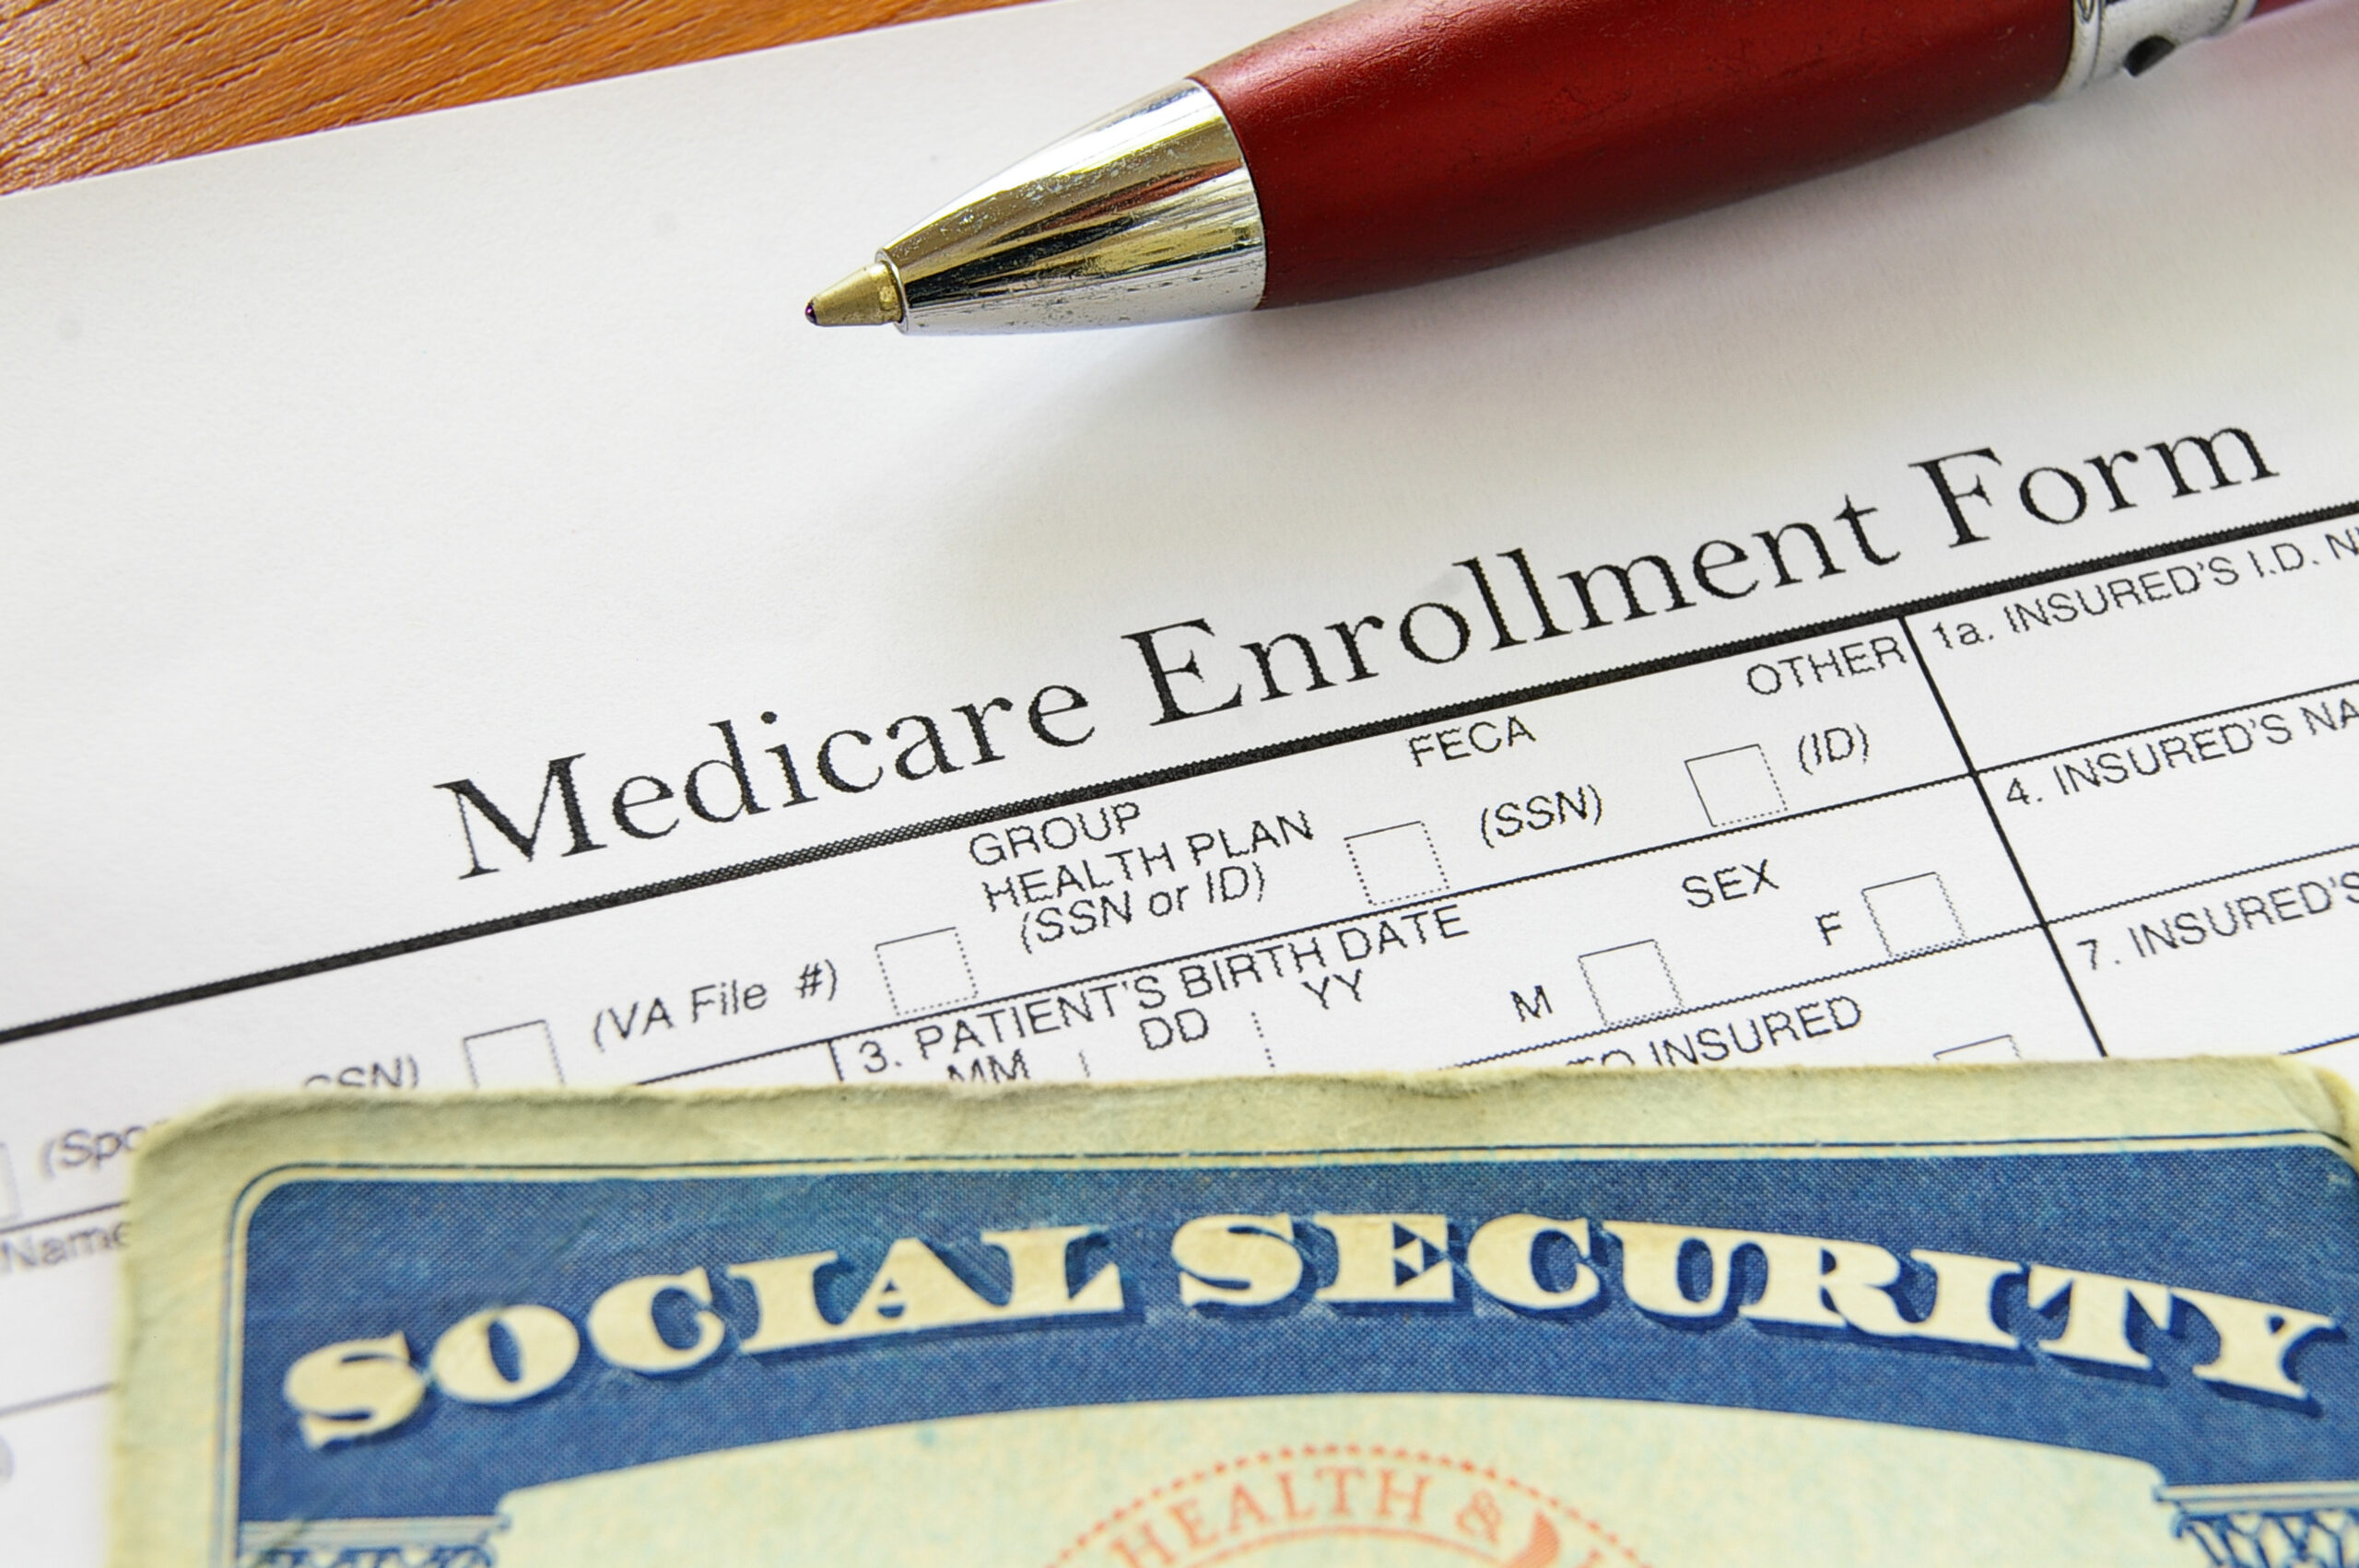 Why We Should Reform Medicare and Social Security in the Next Few Years